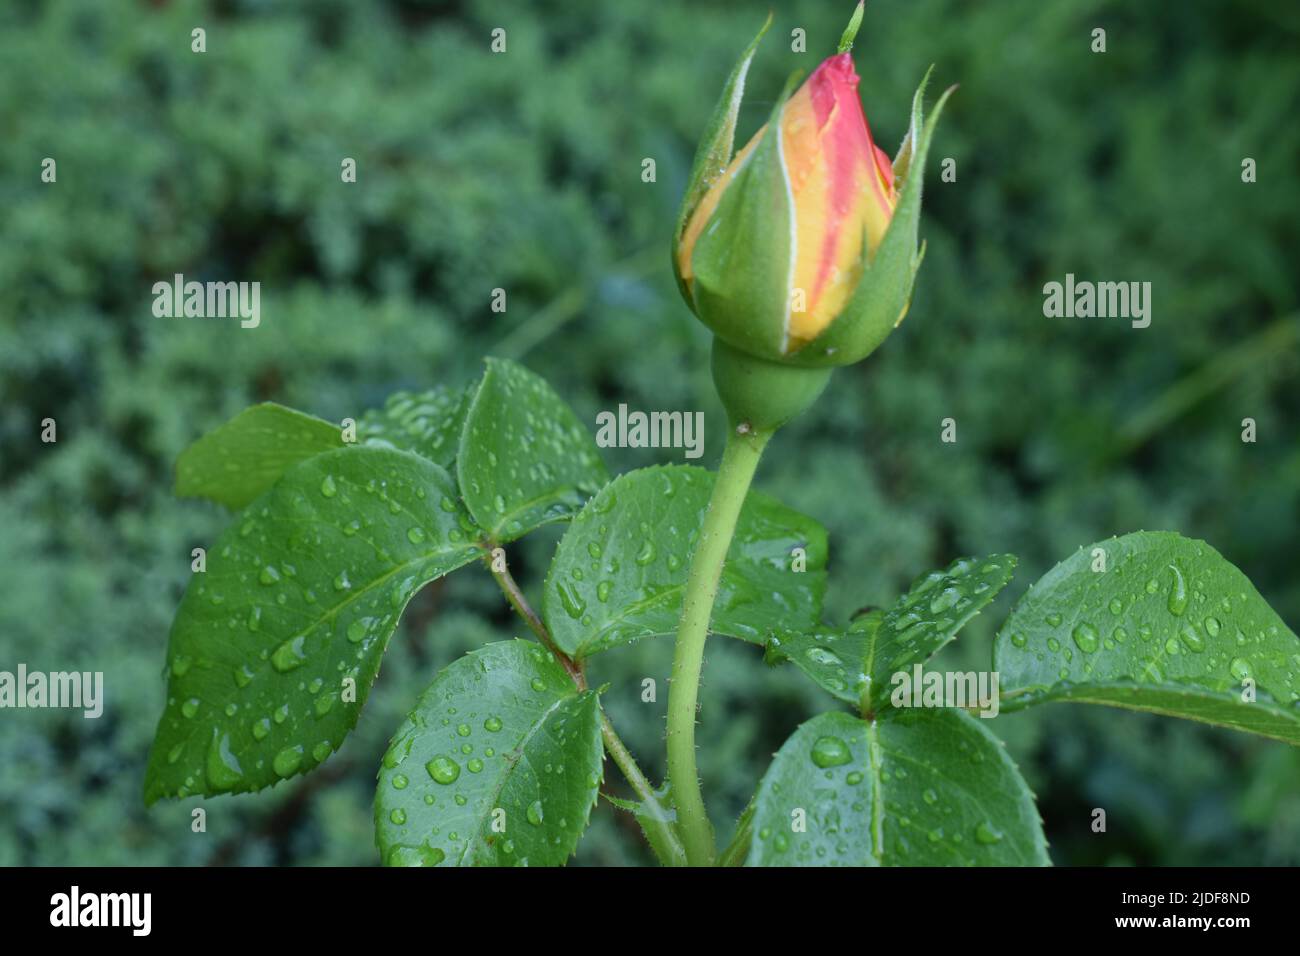 Newly formed multi colored rose bud on a blurred green background with in focus water drops on the foreground leaves-01 Stock Photo